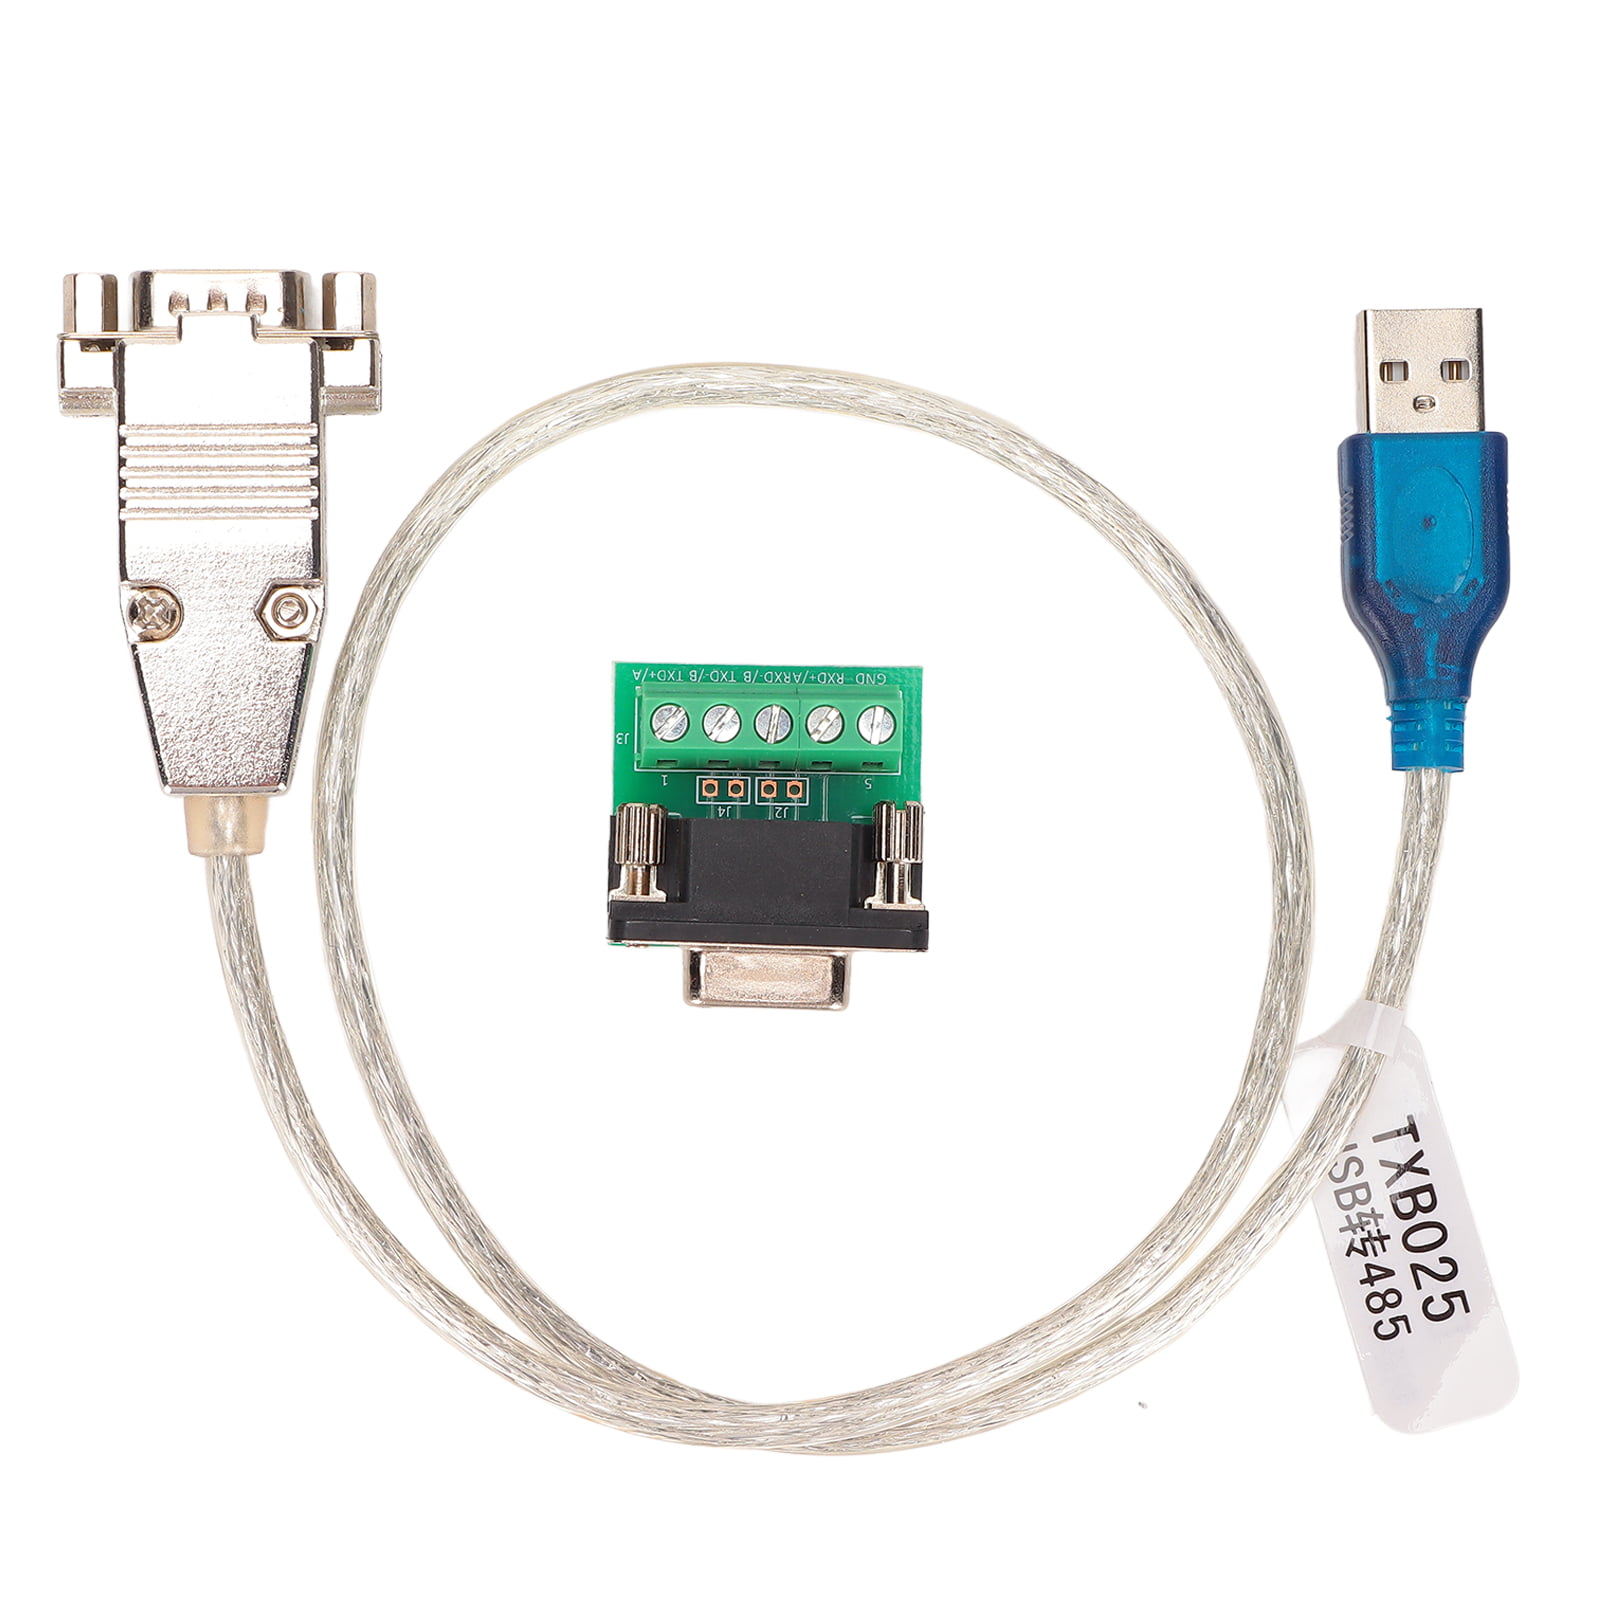 Rs485 Serial Port Converter Adapter Cable Usb To Rs422 Serial Port Converter Cable USB To RS422 RS485 Serial Port Converter Adapter Cable 1200m Transmission - Walmart.com